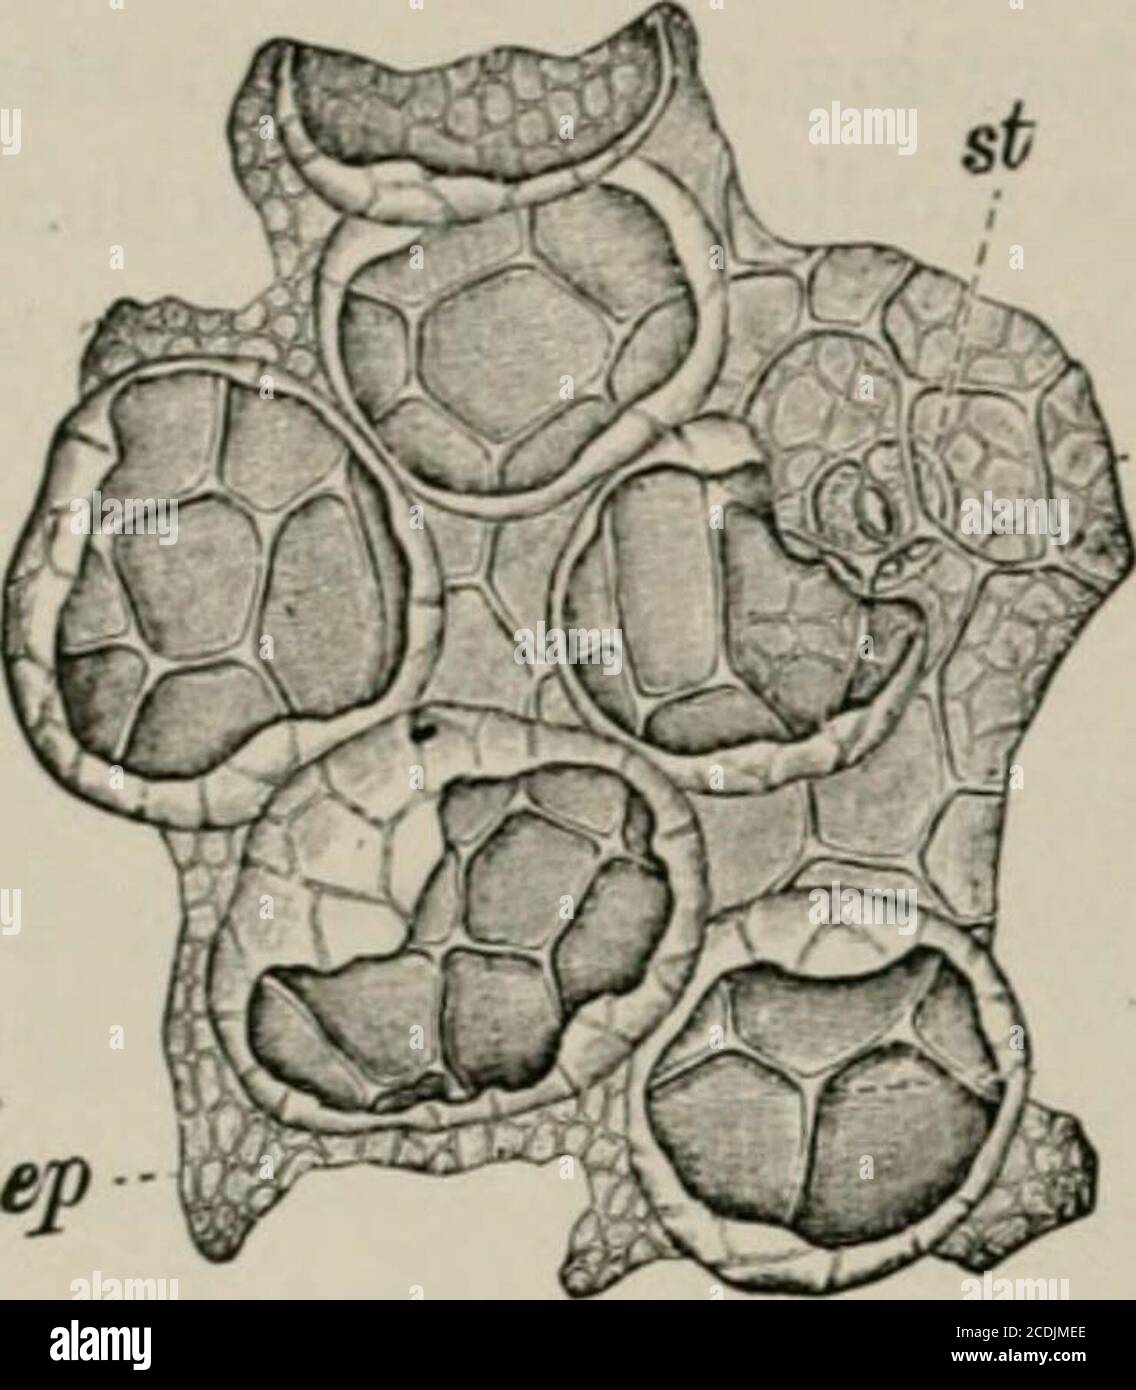 . The microscopy of vegetable foods, with special reference to the detection of adulteration and the diagnosis of mixtures . nd are either empty or contain formless brown masses or else crjstal clusters of cal-cium oxalate. The stone cells are irregularin shape and have colorless walls more orless strongly thickened, in which branchingpores and concentric markings are conspicu-ous. They are distributed through the par-enchymatous ground tissue, being especiallynumerous in the inner layers, where theyform a nearly continuous coat one or morecells thick. 4. Compressed Cells in several layers lin Stock Photo